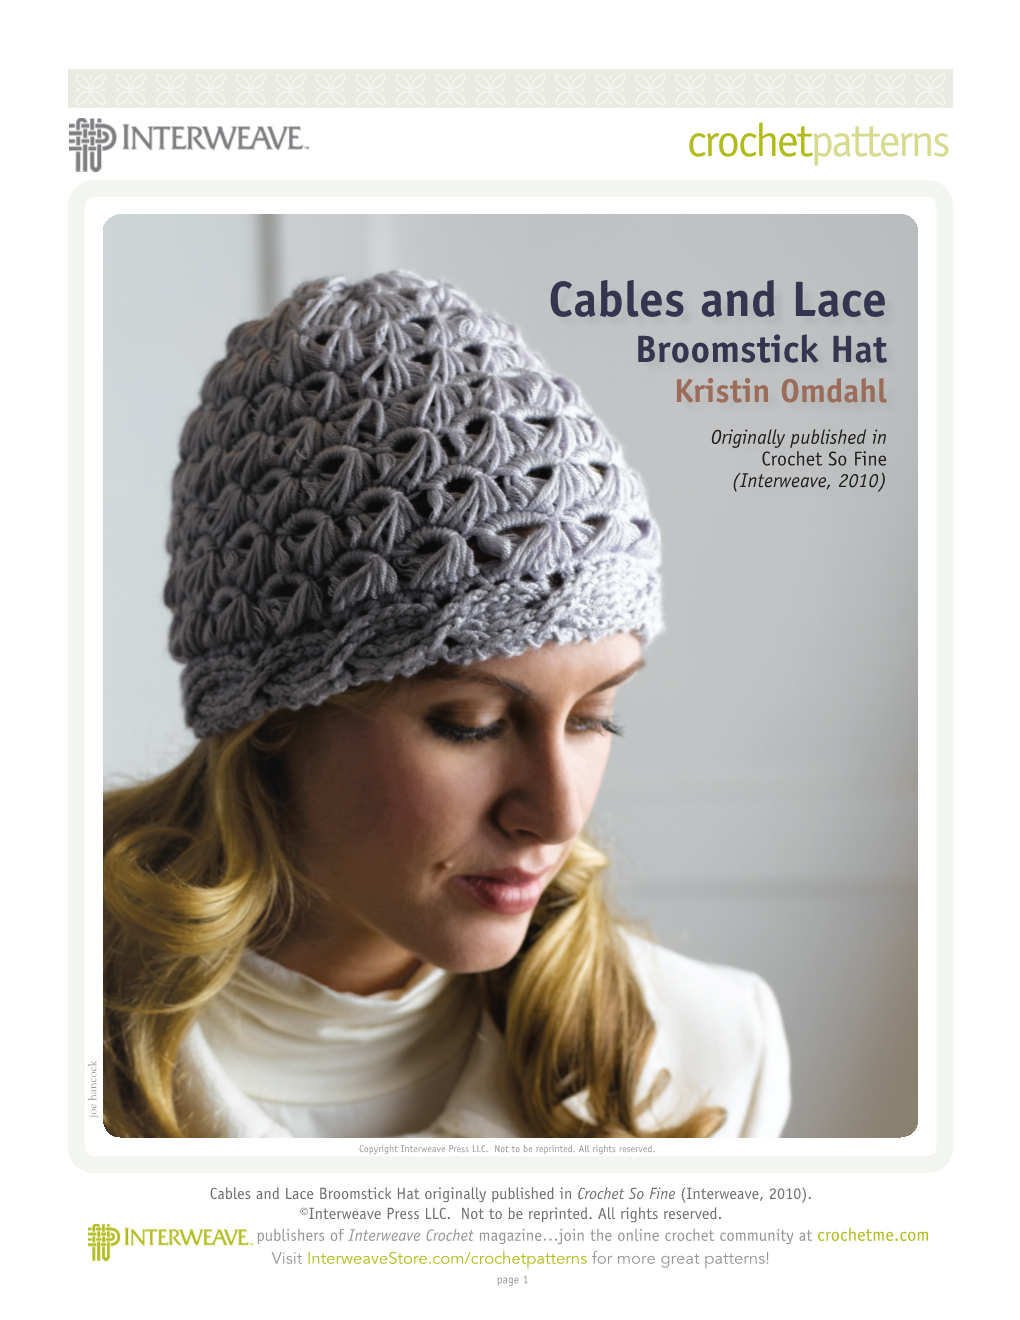 Cables and Lace Broomstick Hat Kristin Omdahl Originally Published in Crochet So Fine (Interweave, 2010) Joe Hancock